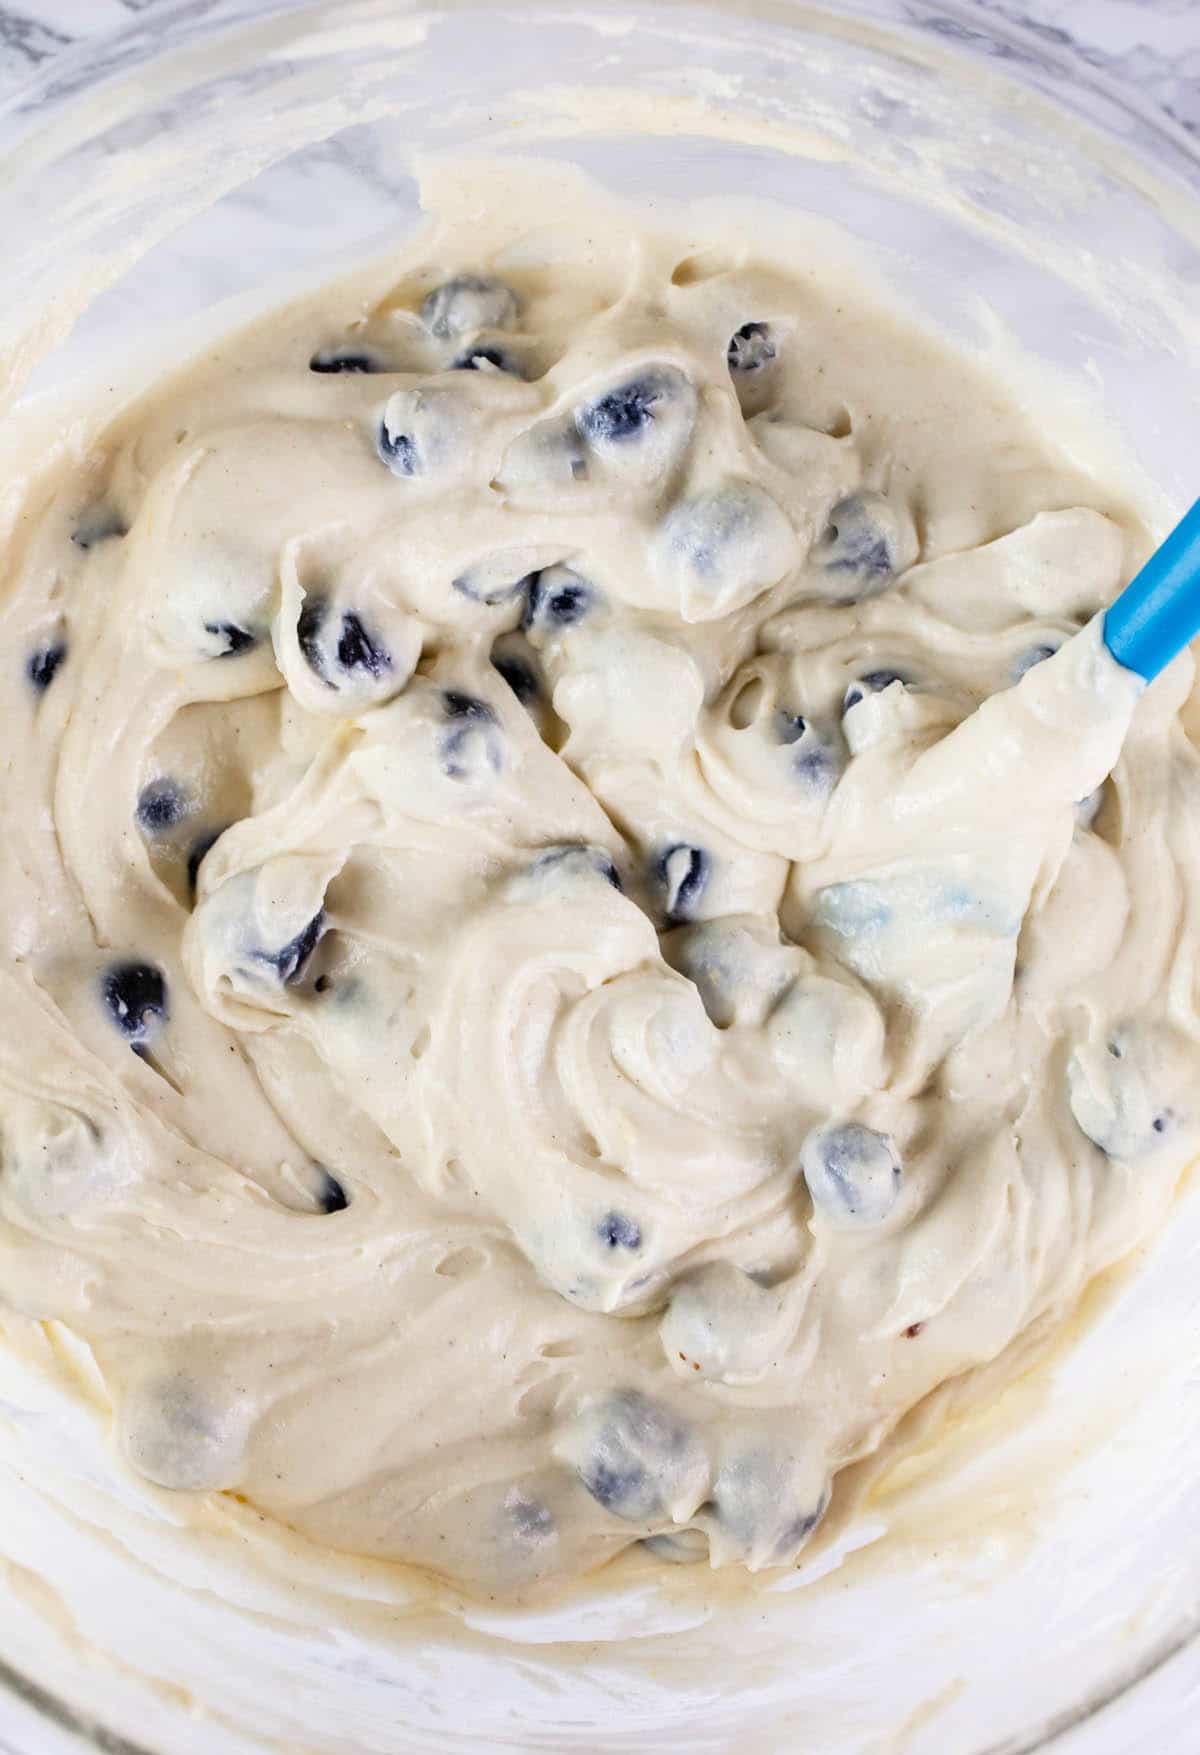 Cake batter combined with blueberries in large glass mixing bowl.